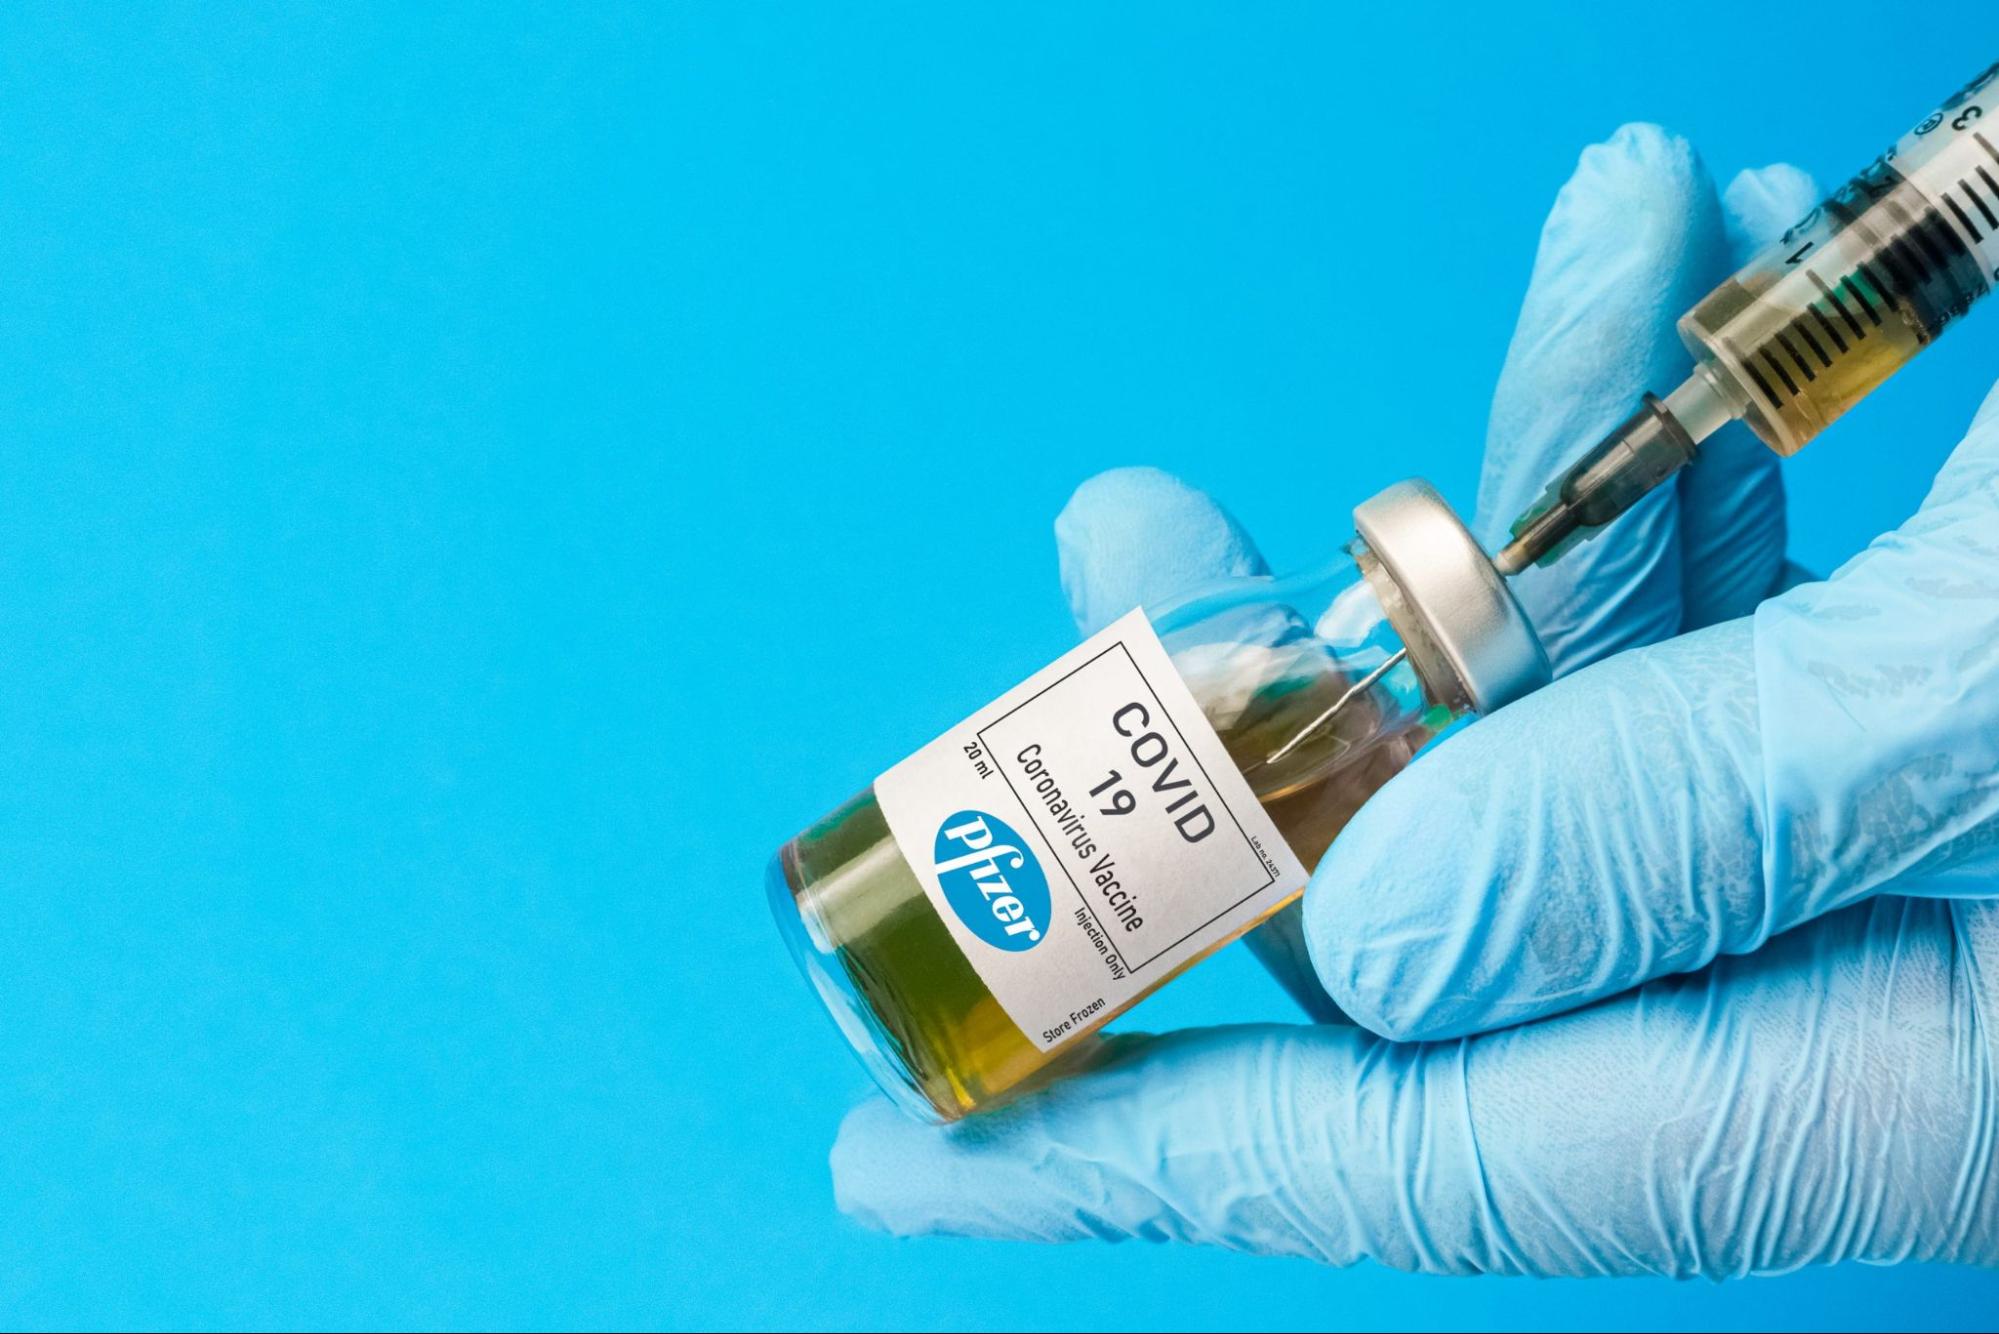 Thailand Seals The Deal With Russia On Sputnik V Covid-19 Vaccine Deliveries